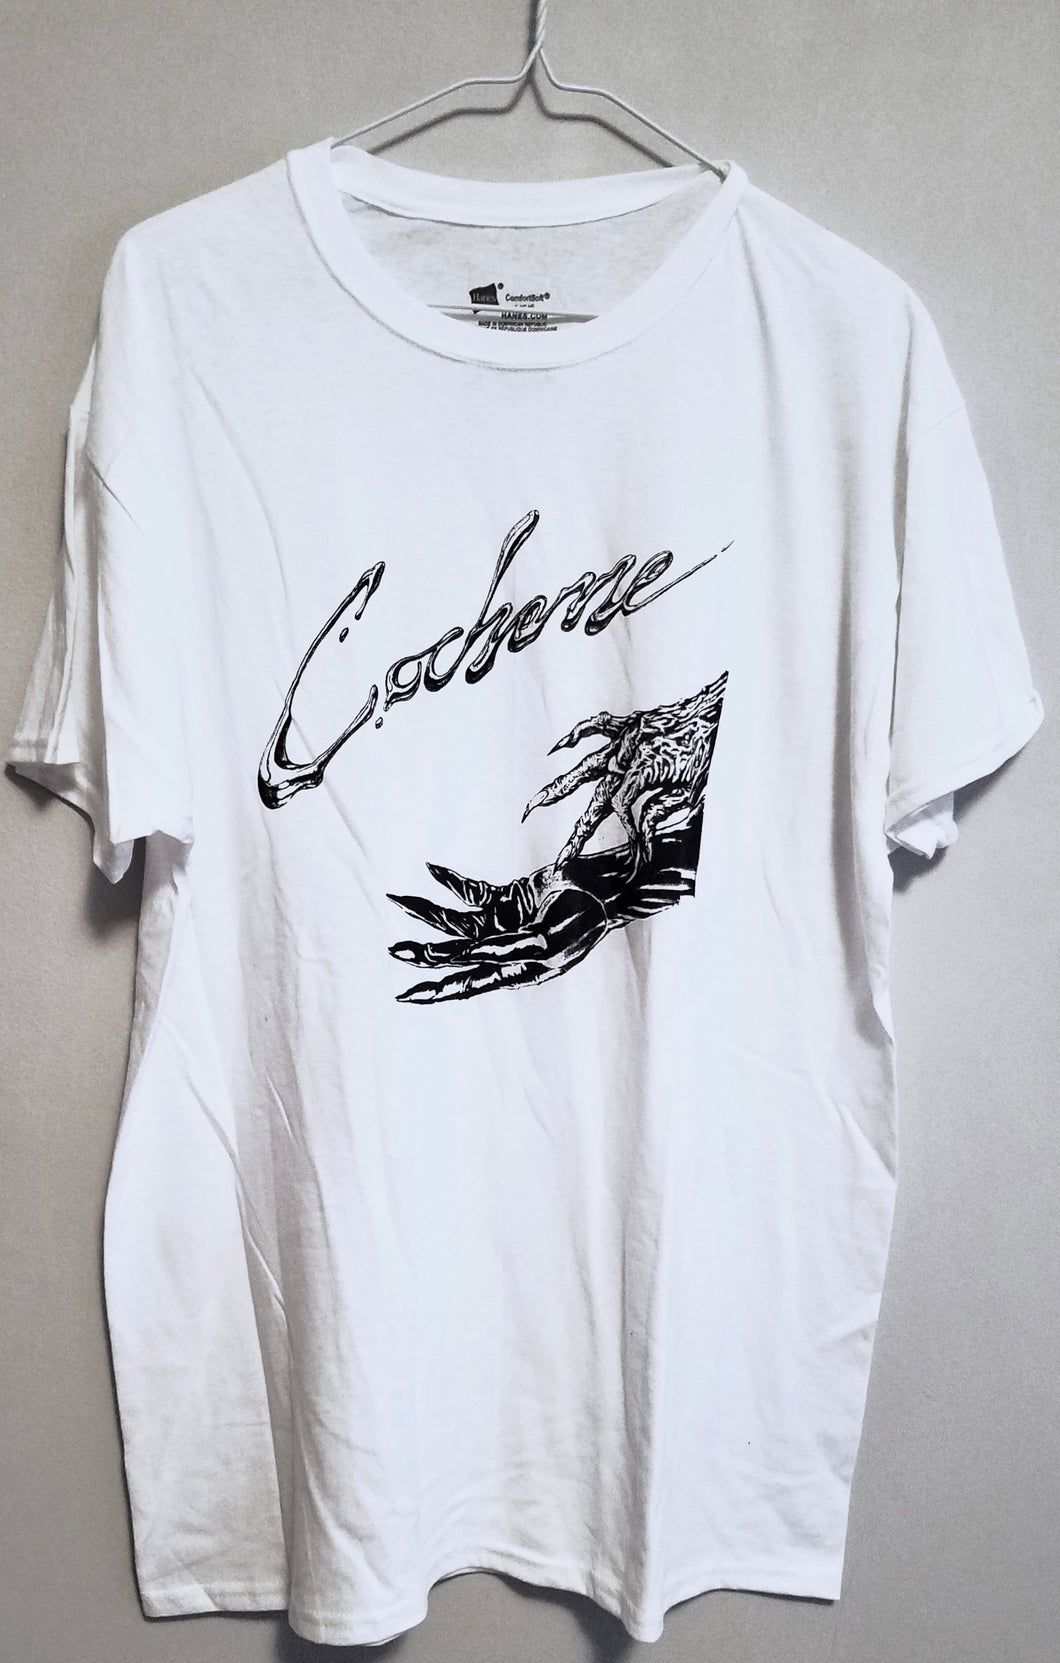 Cochonne t-shirt (PRE-ORDER) (ships around October 8, 2021)